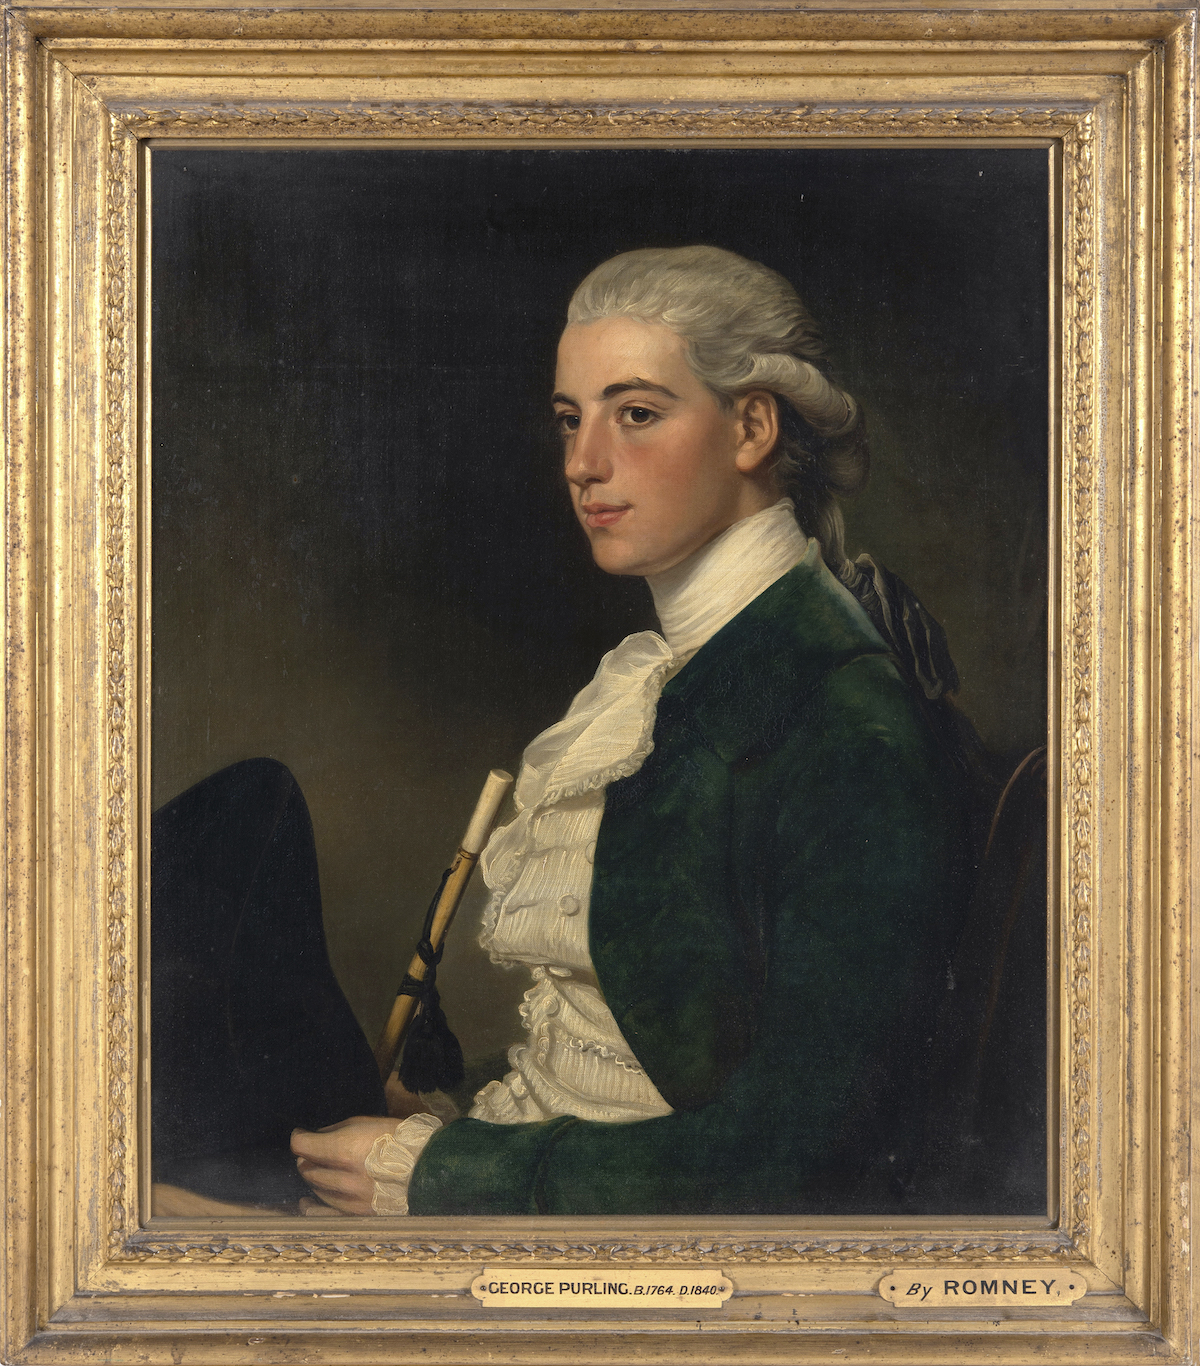 A portrait of George Purling, attributed to George Romney (1734-1802)